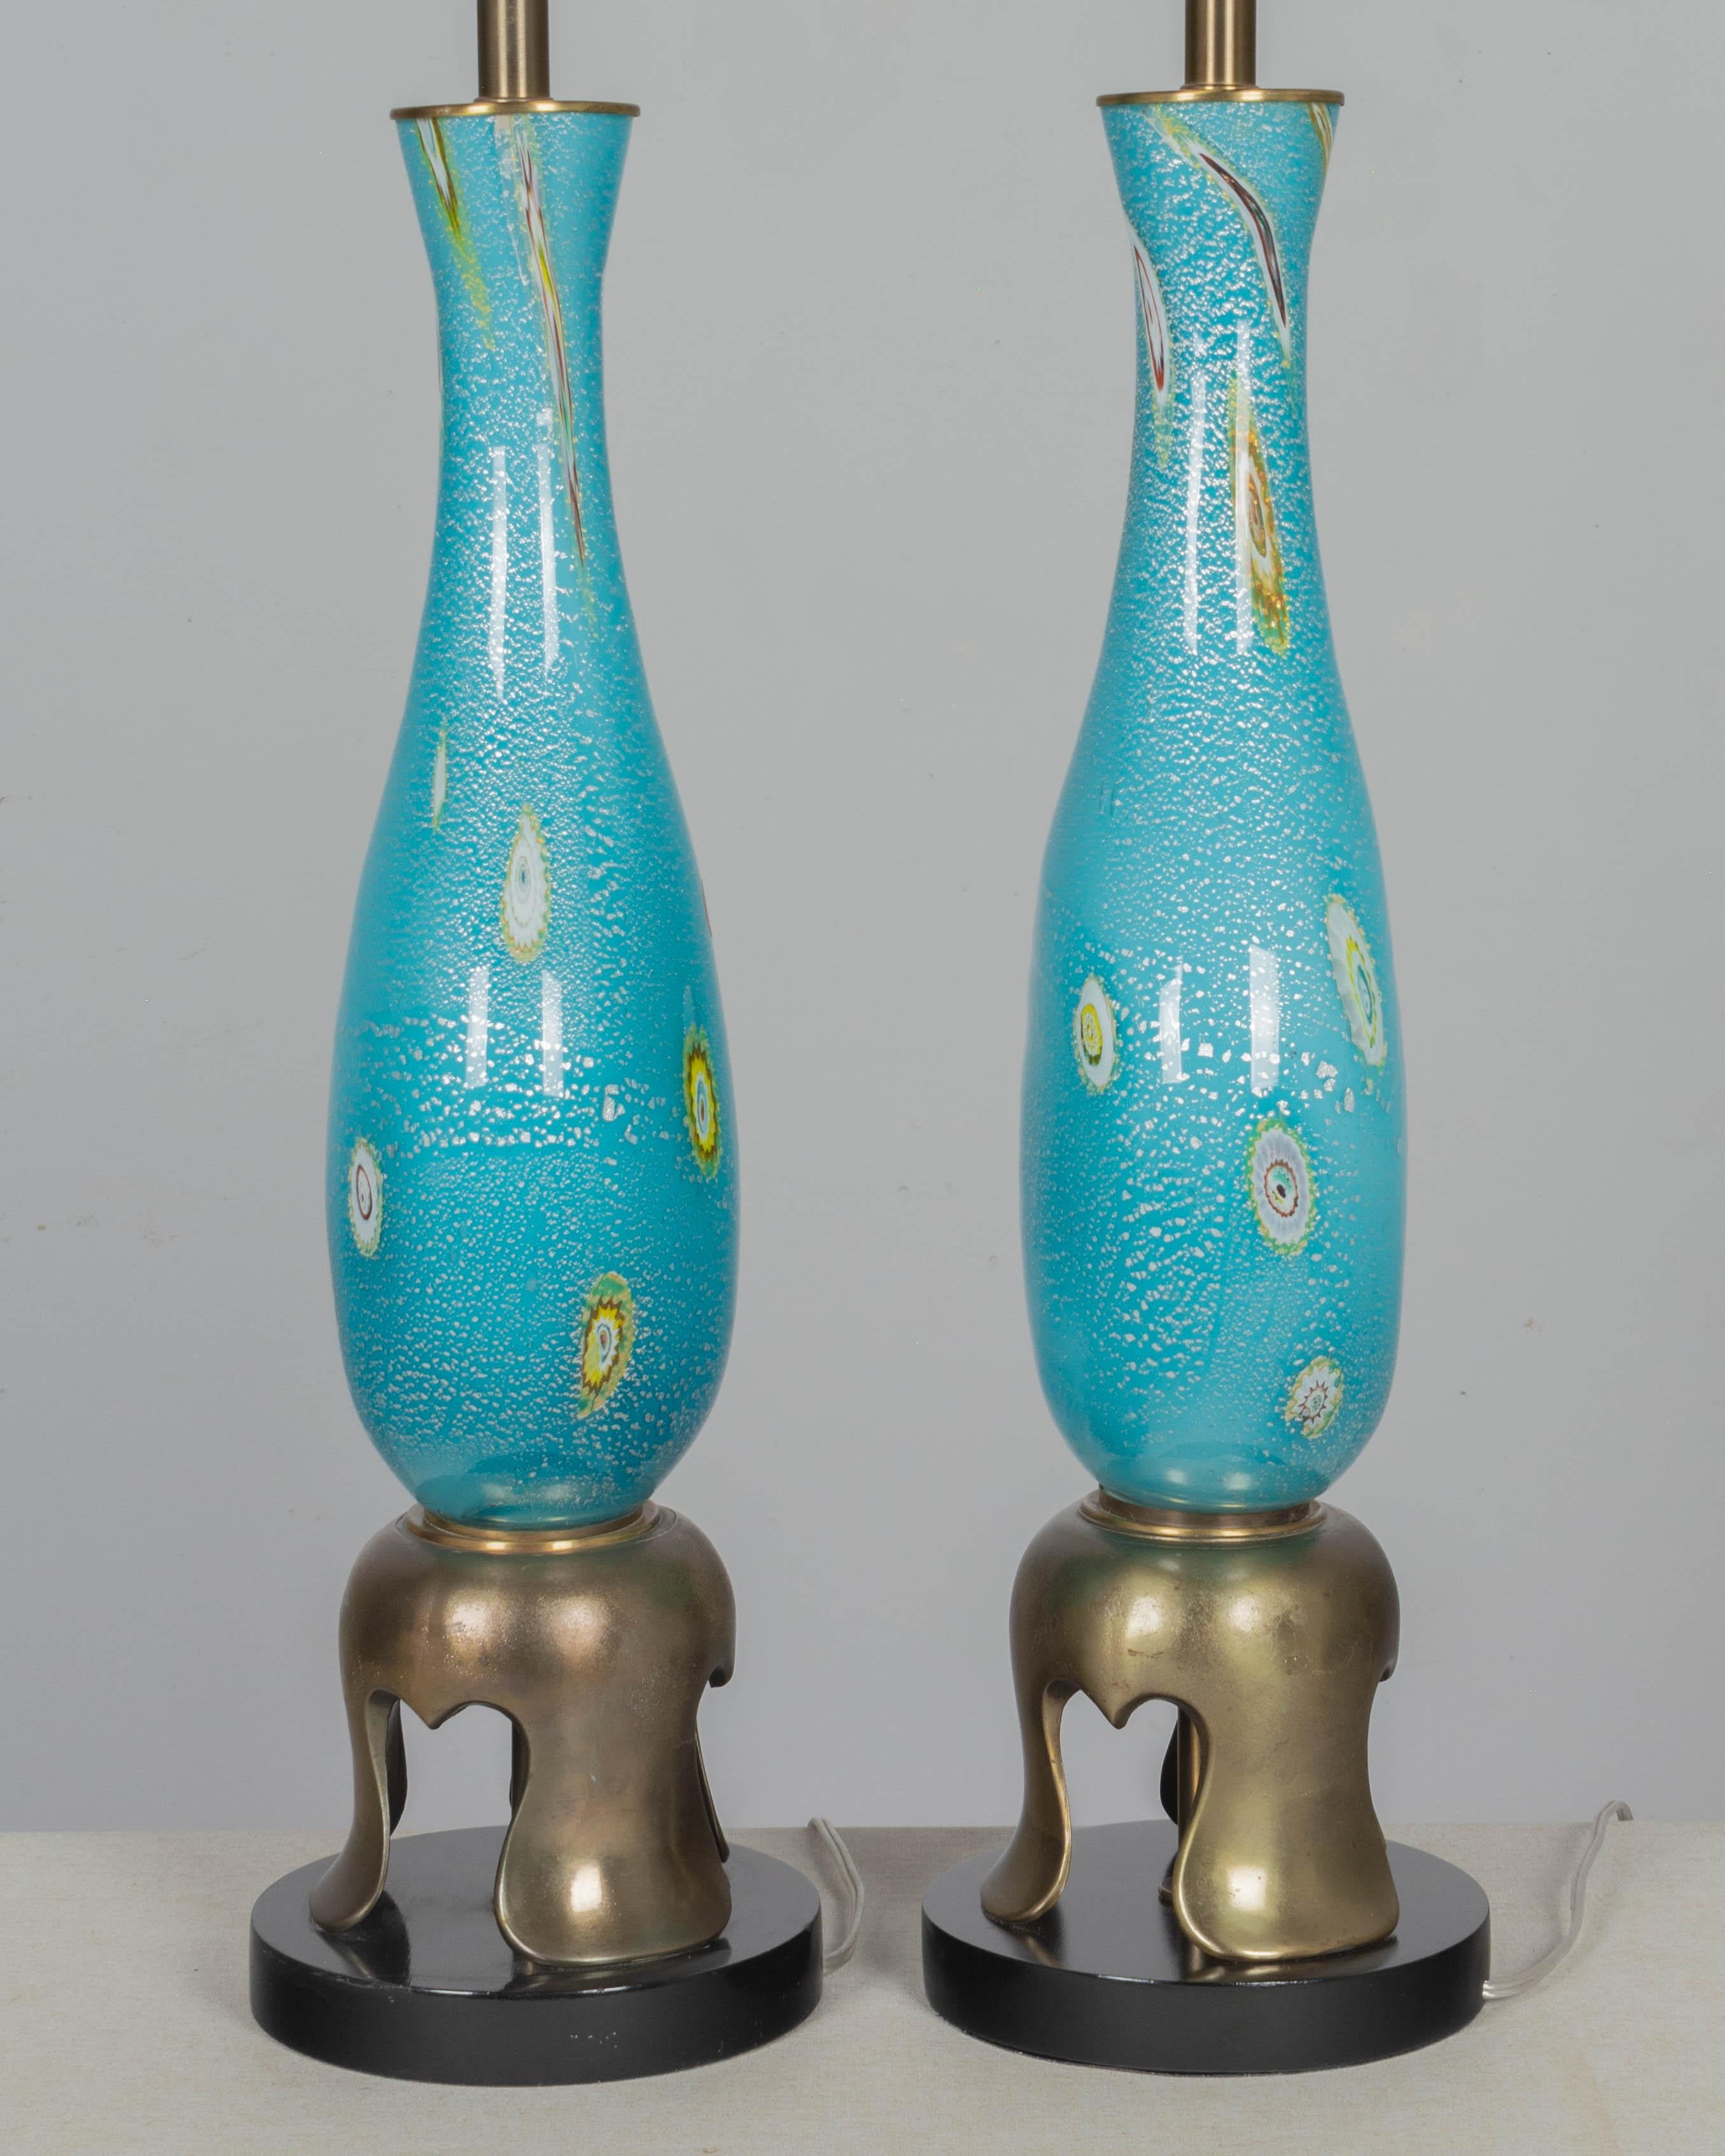 Murano Glass Barovier & Toso Lamp Pair For Sale 2